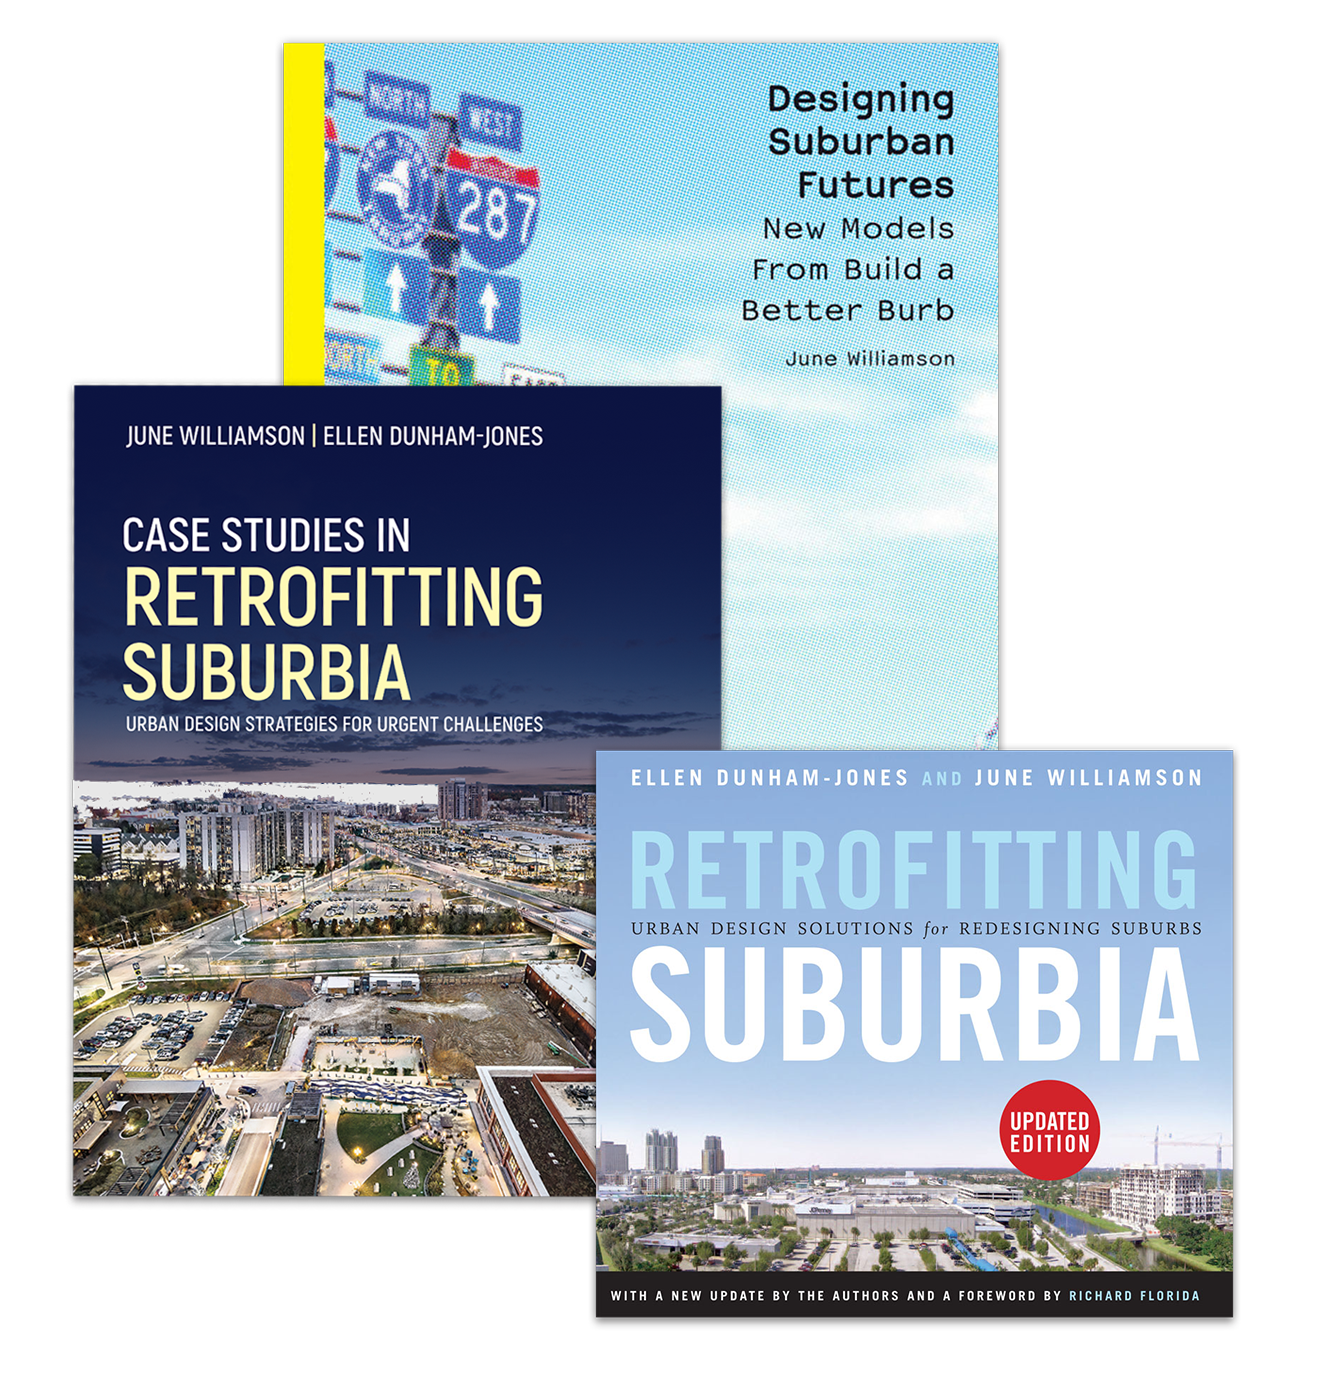 Designing Suburban Futures New Models from Build a Better Burb